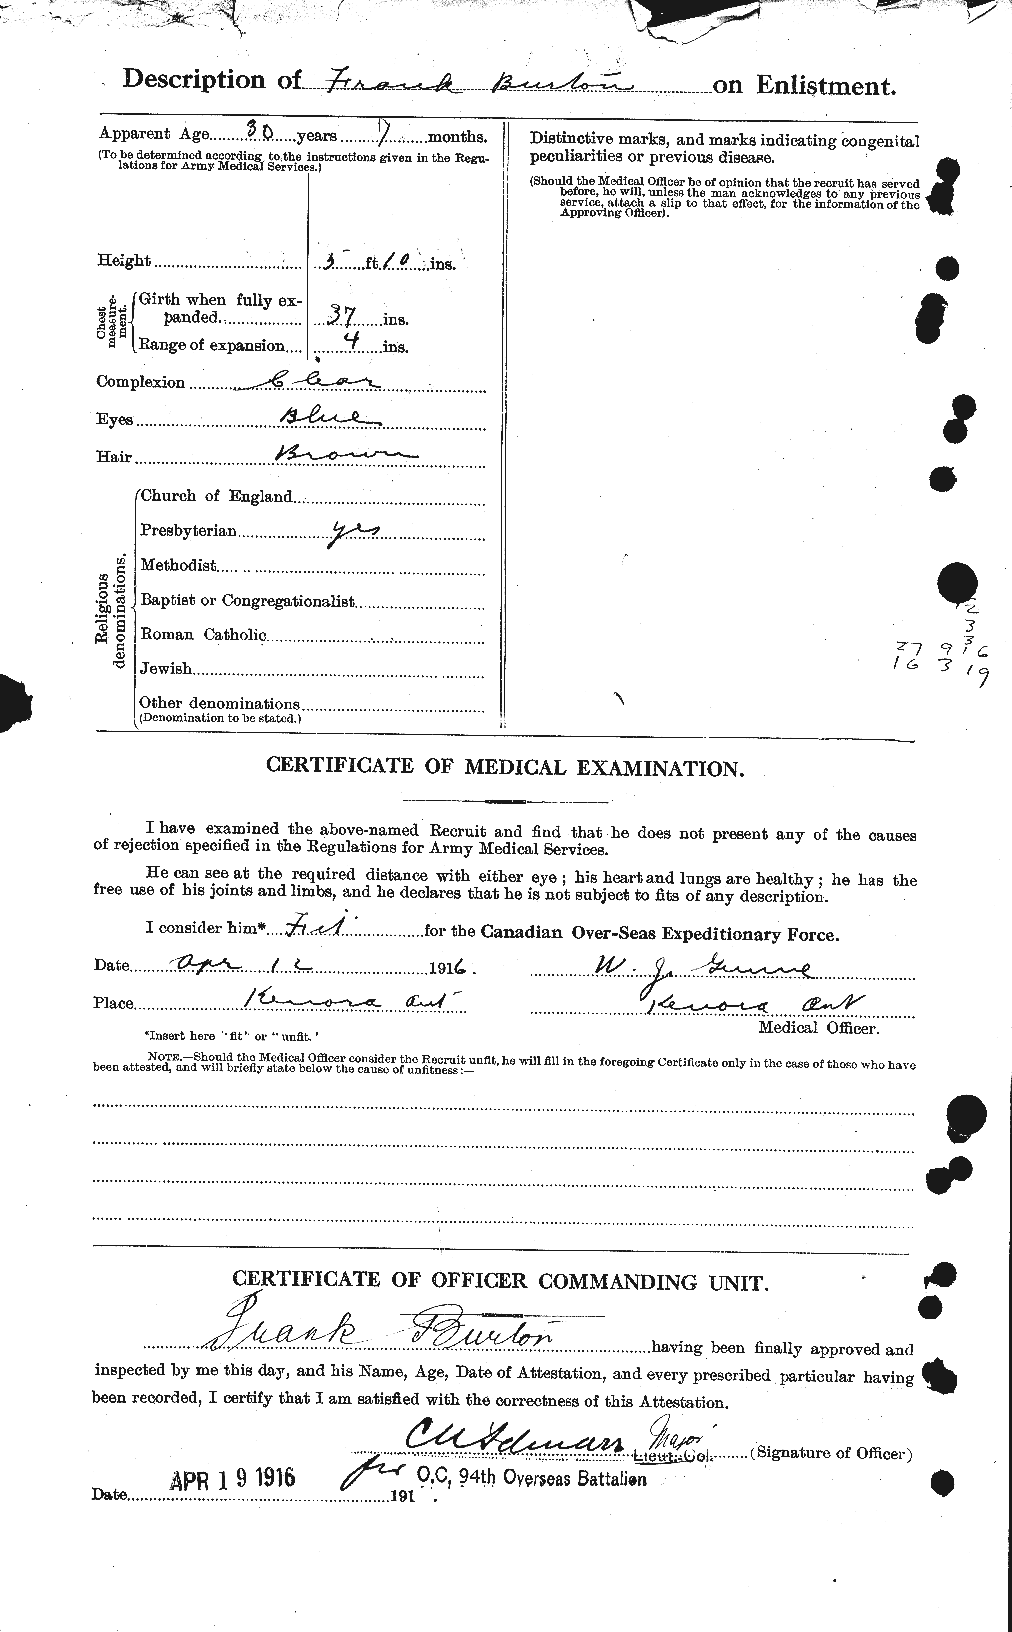 Personnel Records of the First World War - CEF 272541b